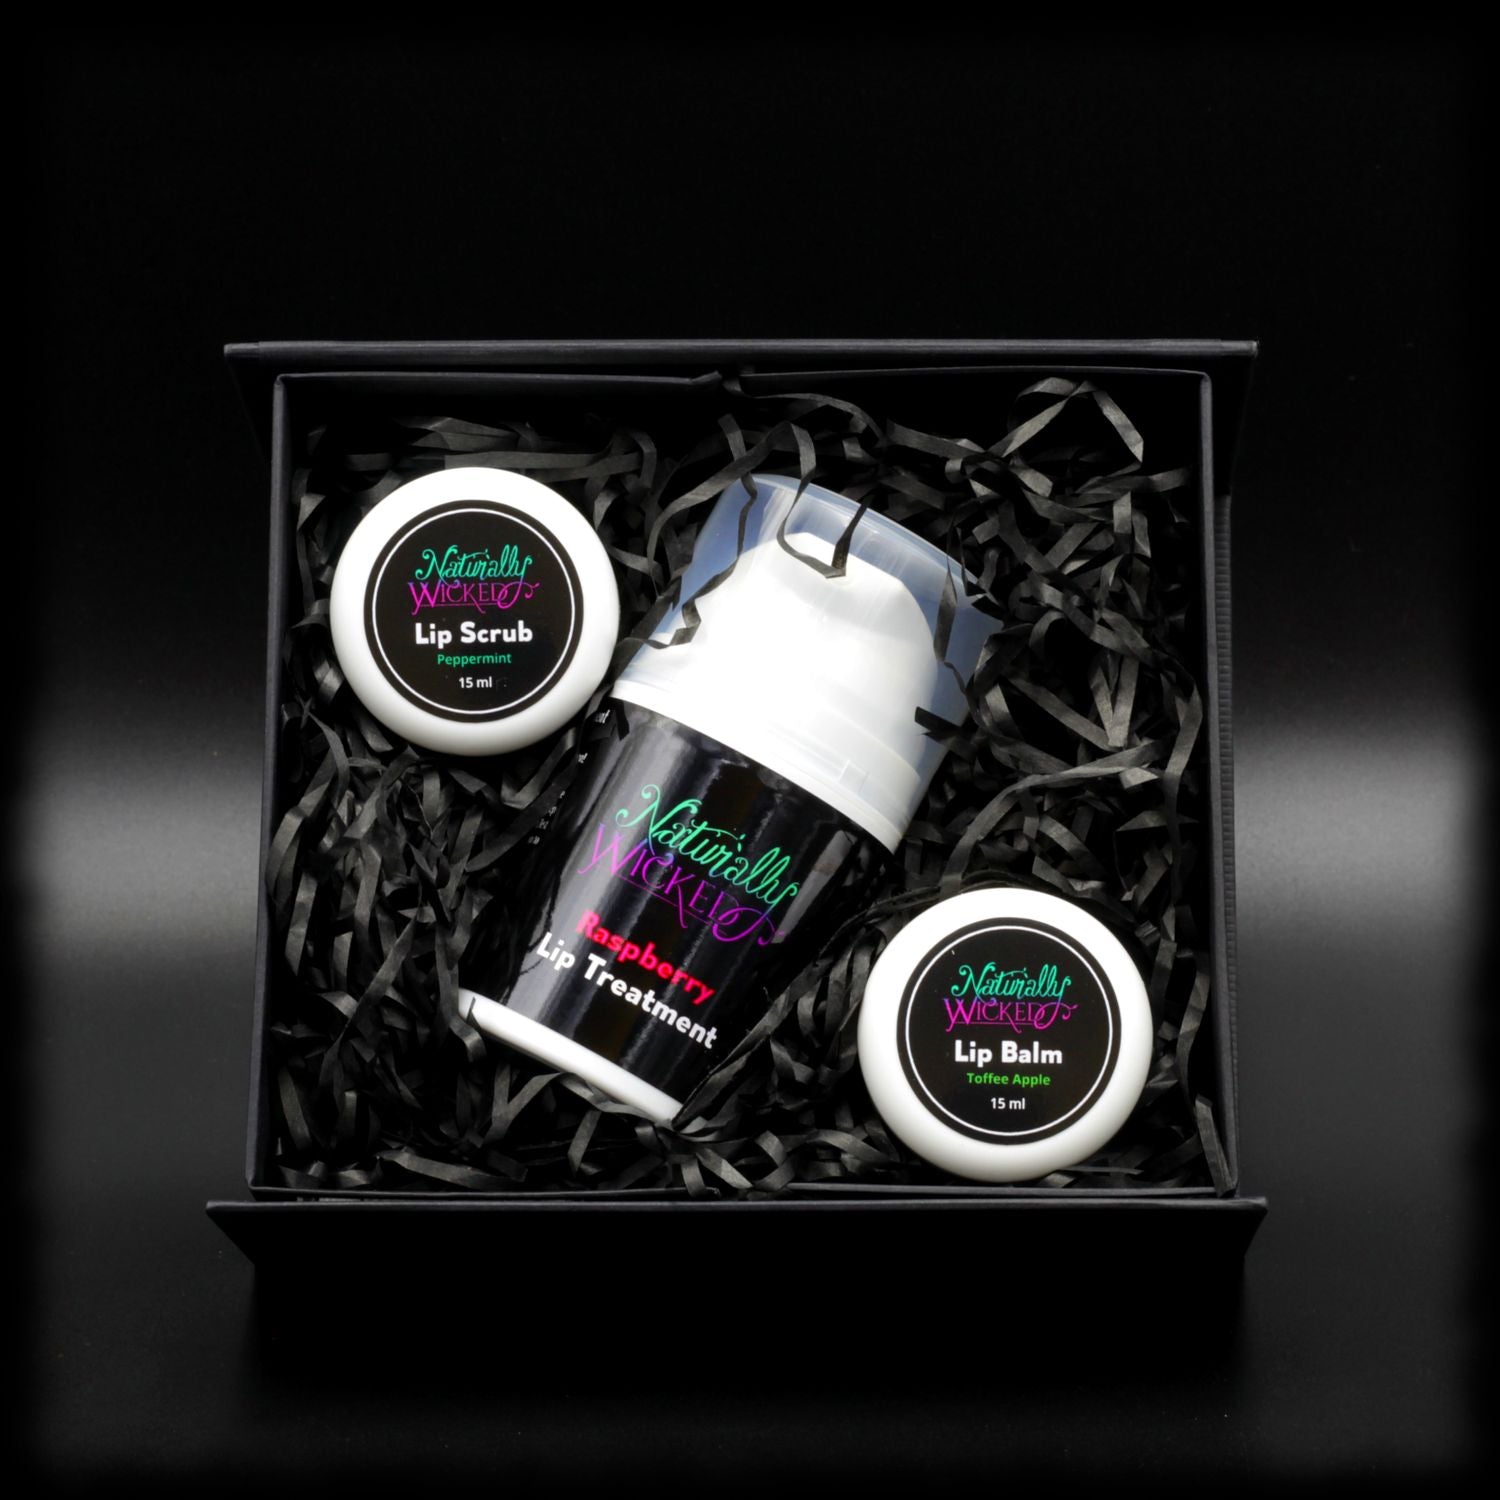 Naturally Wicked Peppermint Lip Scrub, Raspberry Lip Treatment & Toffee Apple Lip Balm Within Black Gift Packaging In Naturally Wicked Original Box